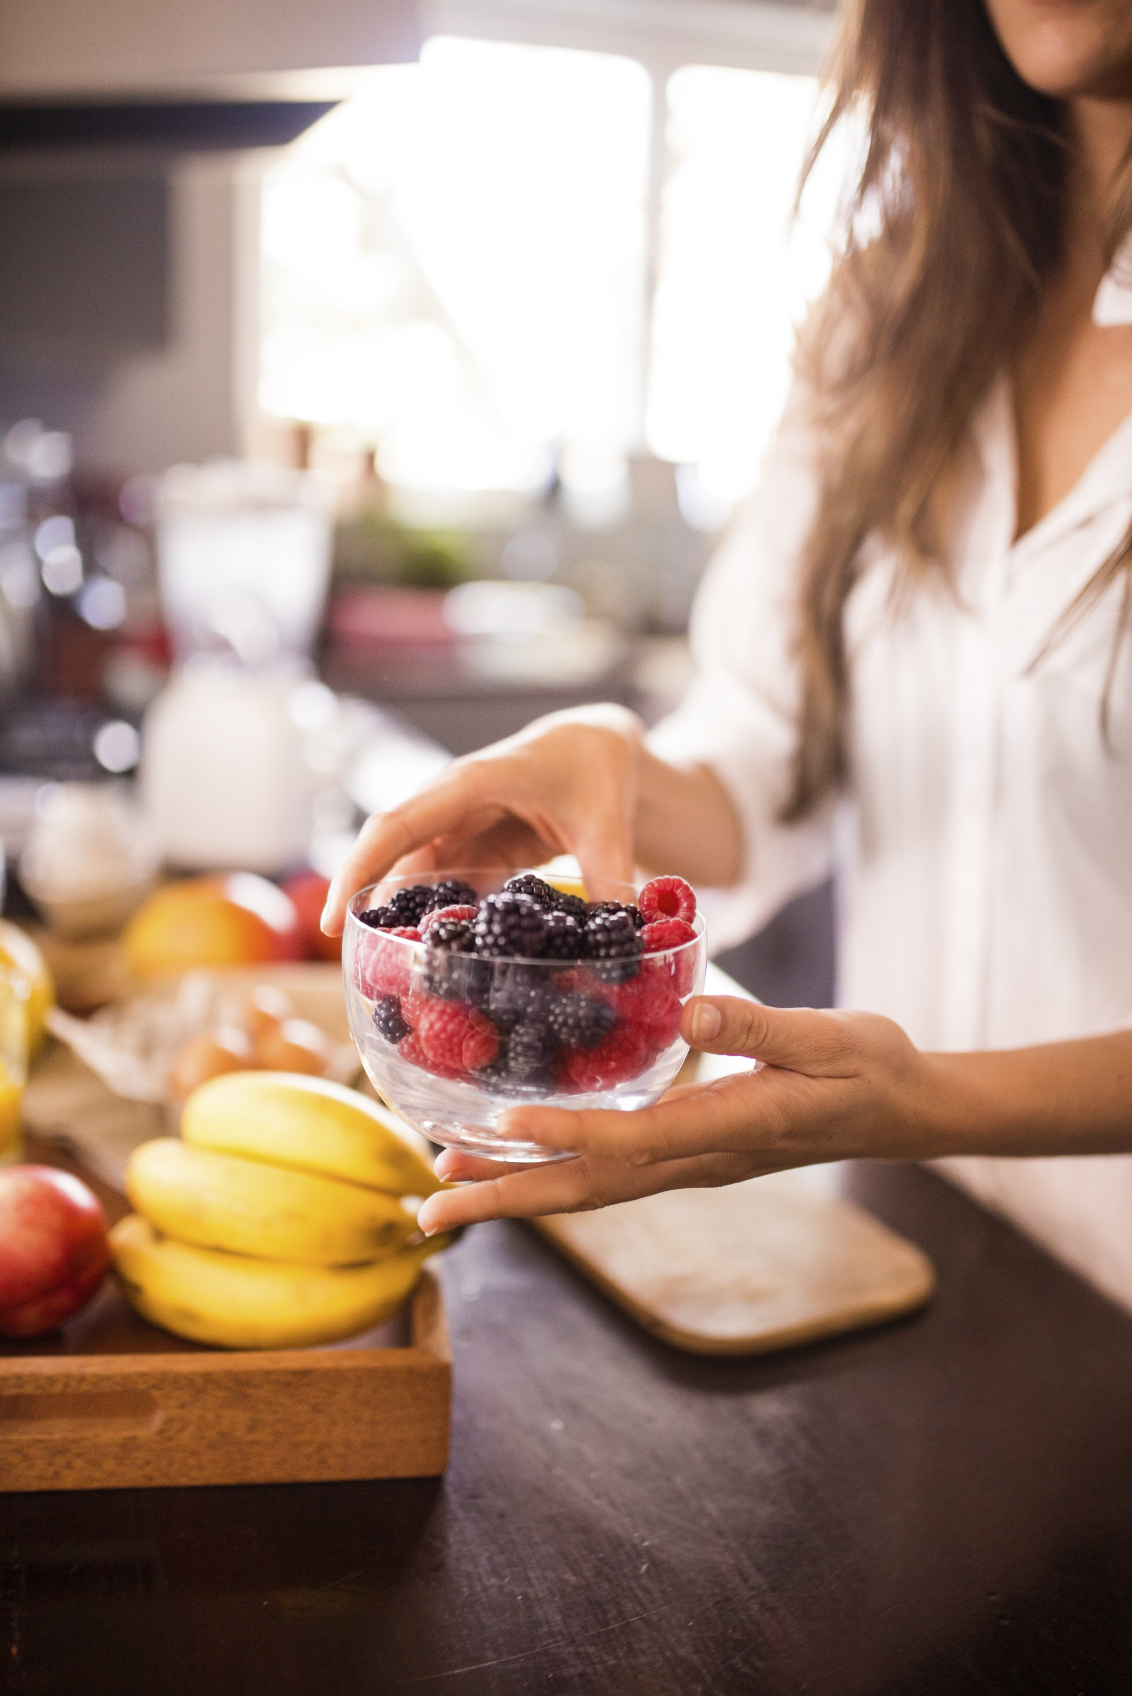 Woman holding bowl of fresh berries for a healthy breakfast